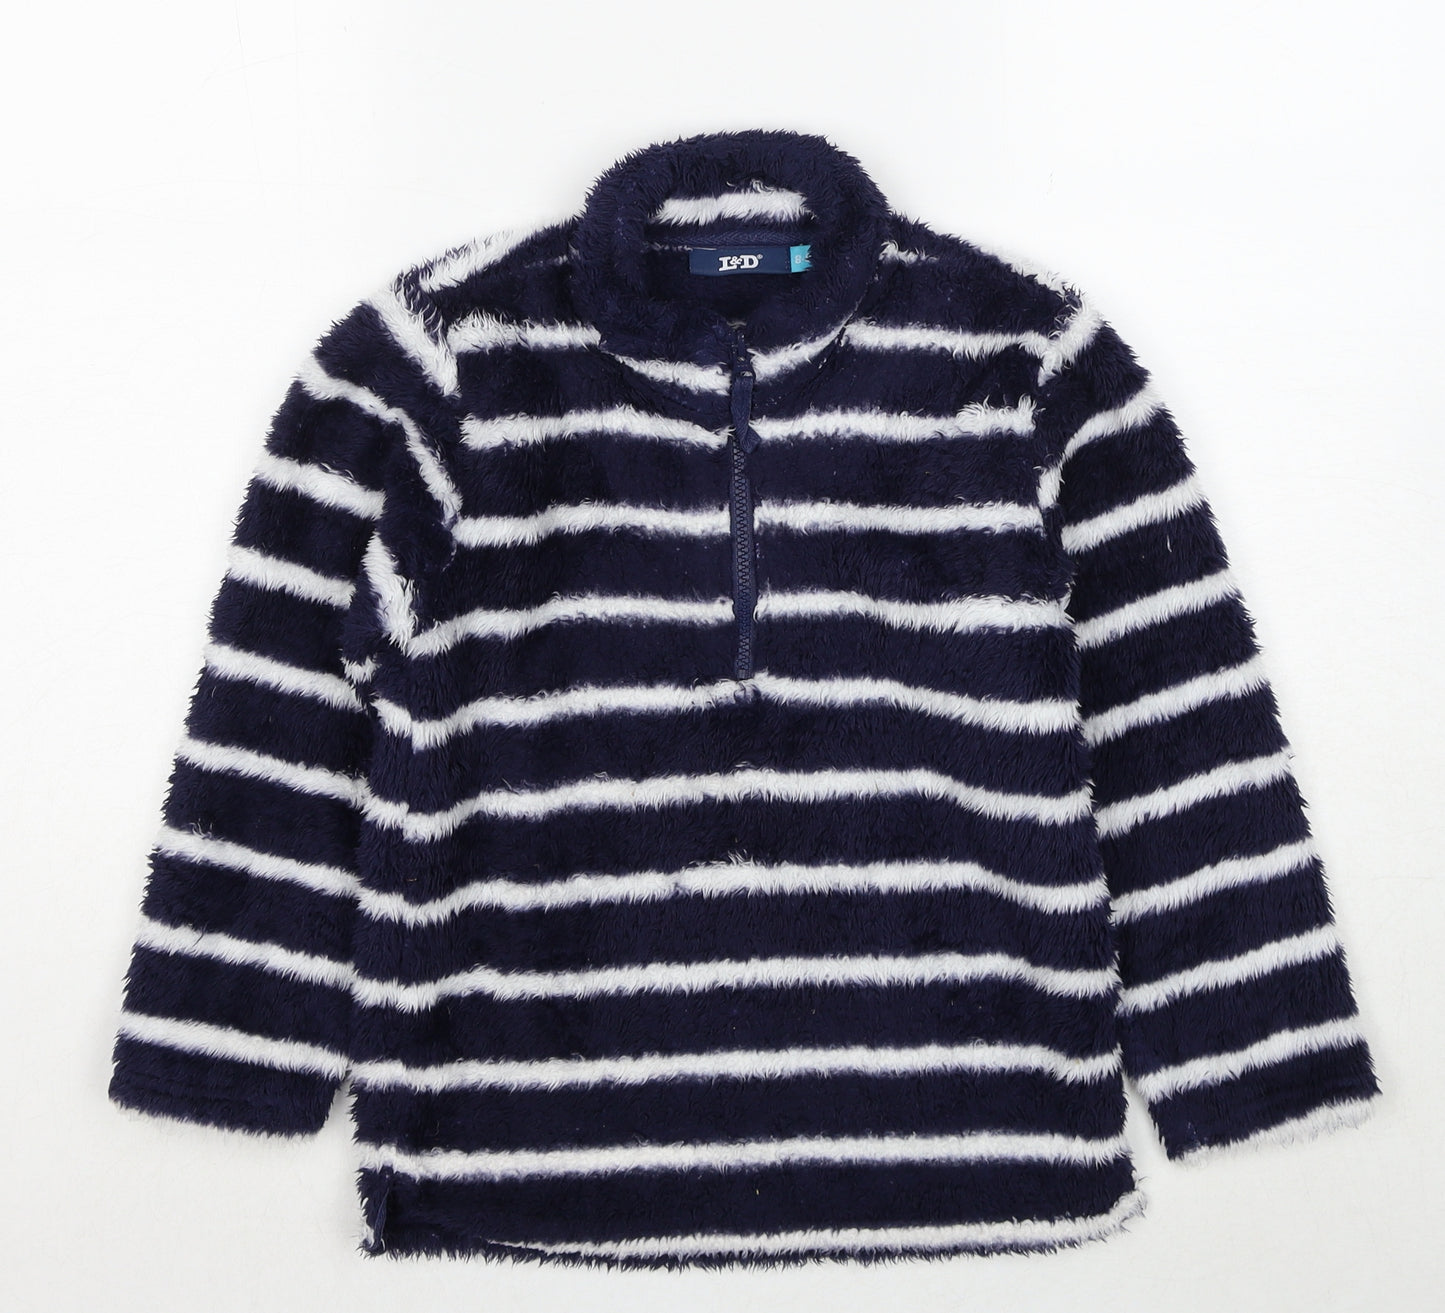 L&D Boys Blue Striped Polyester Pullover Sweatshirt Size 8-9 Years Pullover